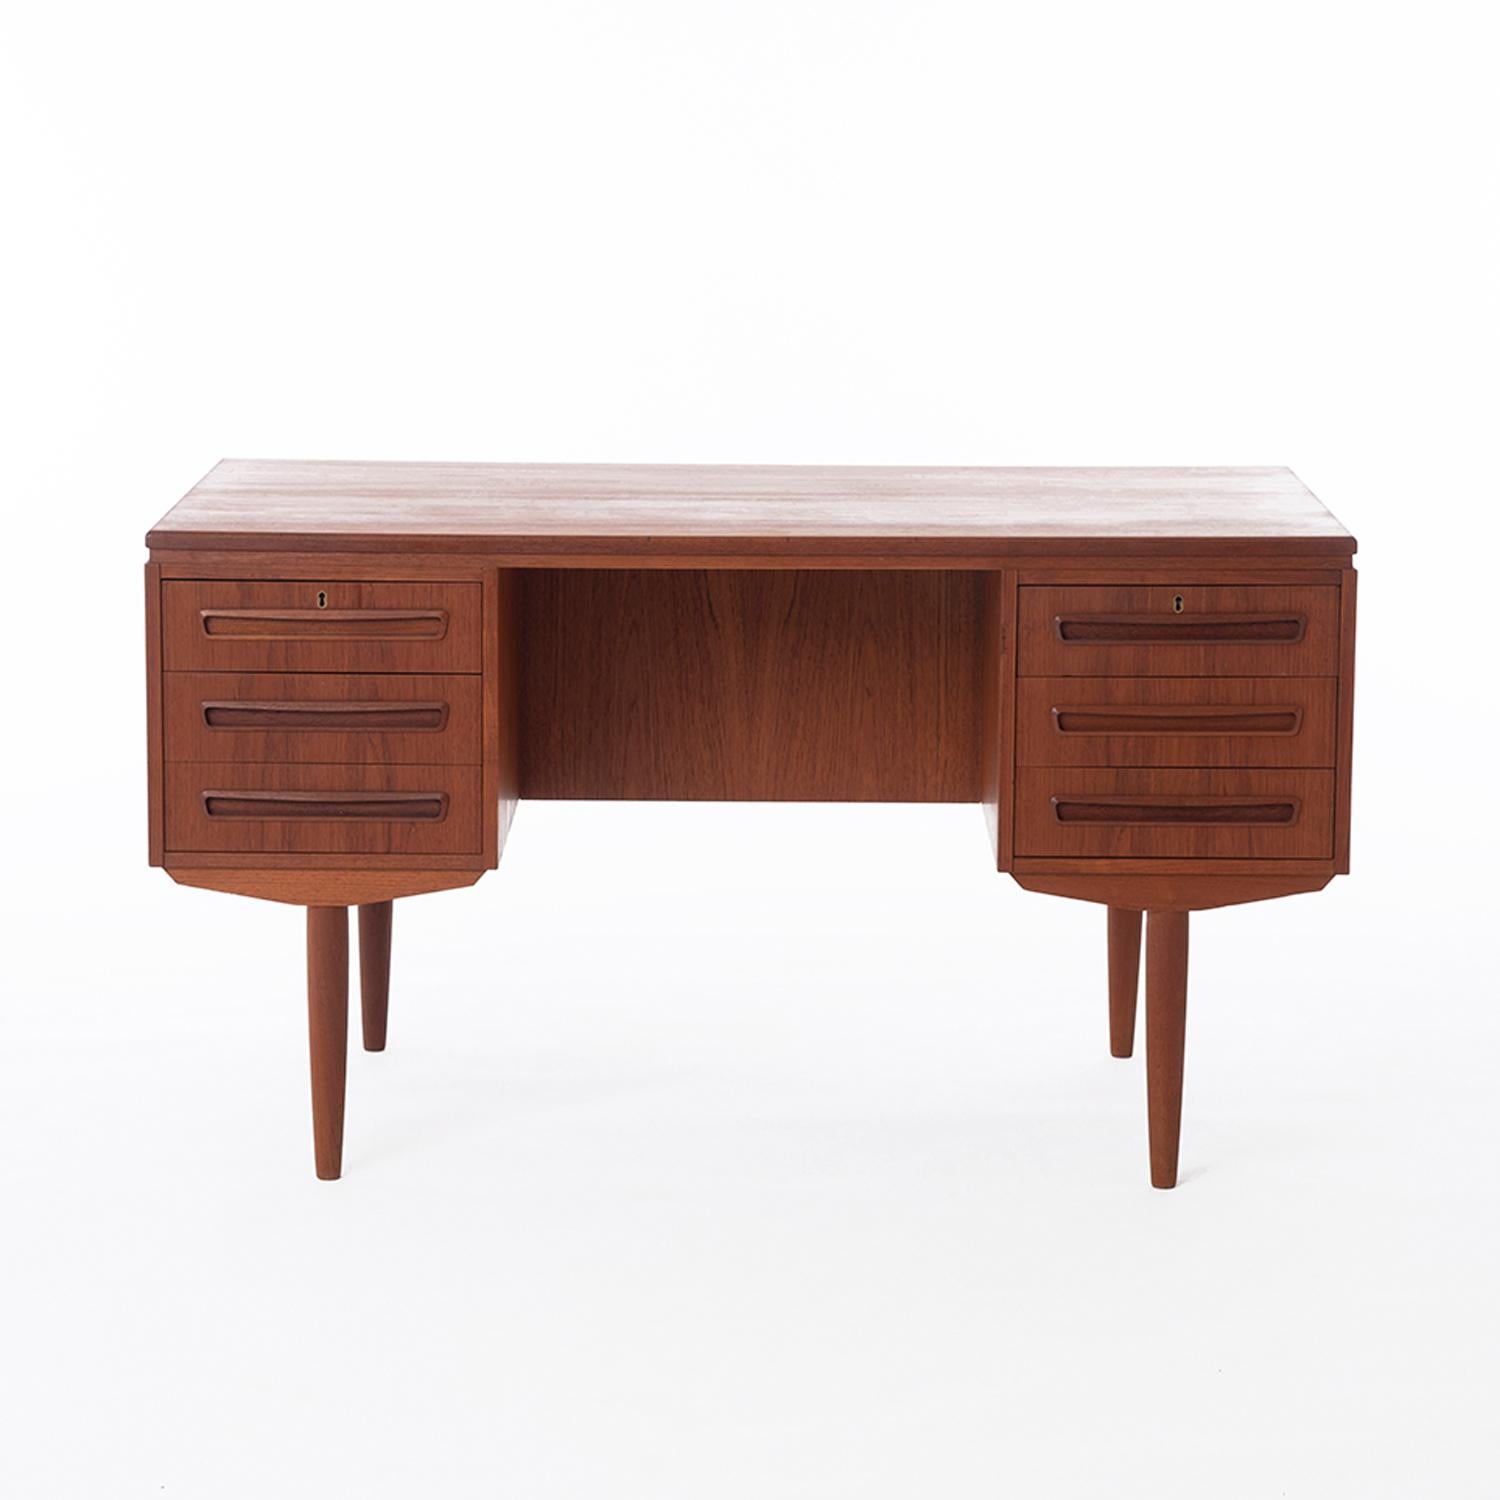 Danish modern teak executive desk. Double pedestal with exterior bookcases and cabinet.


Professional, skilled furniture restoration is an integral part of what we do every day. Our goal is to provide beautiful, functional furniture that honors